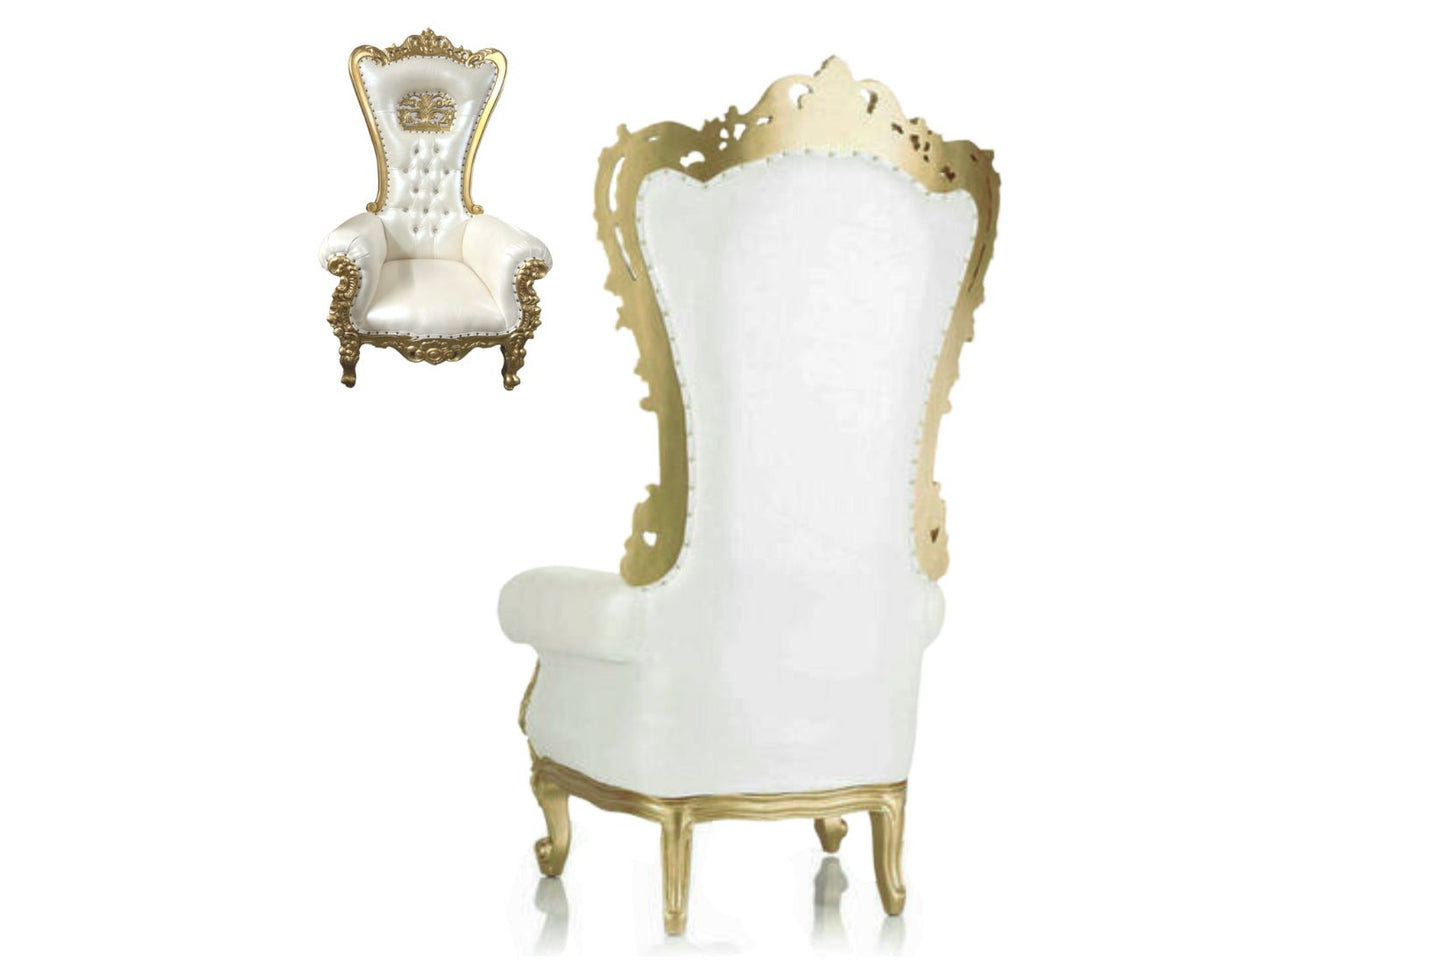 Crown Throne Chair Rental - Ivory and Gold